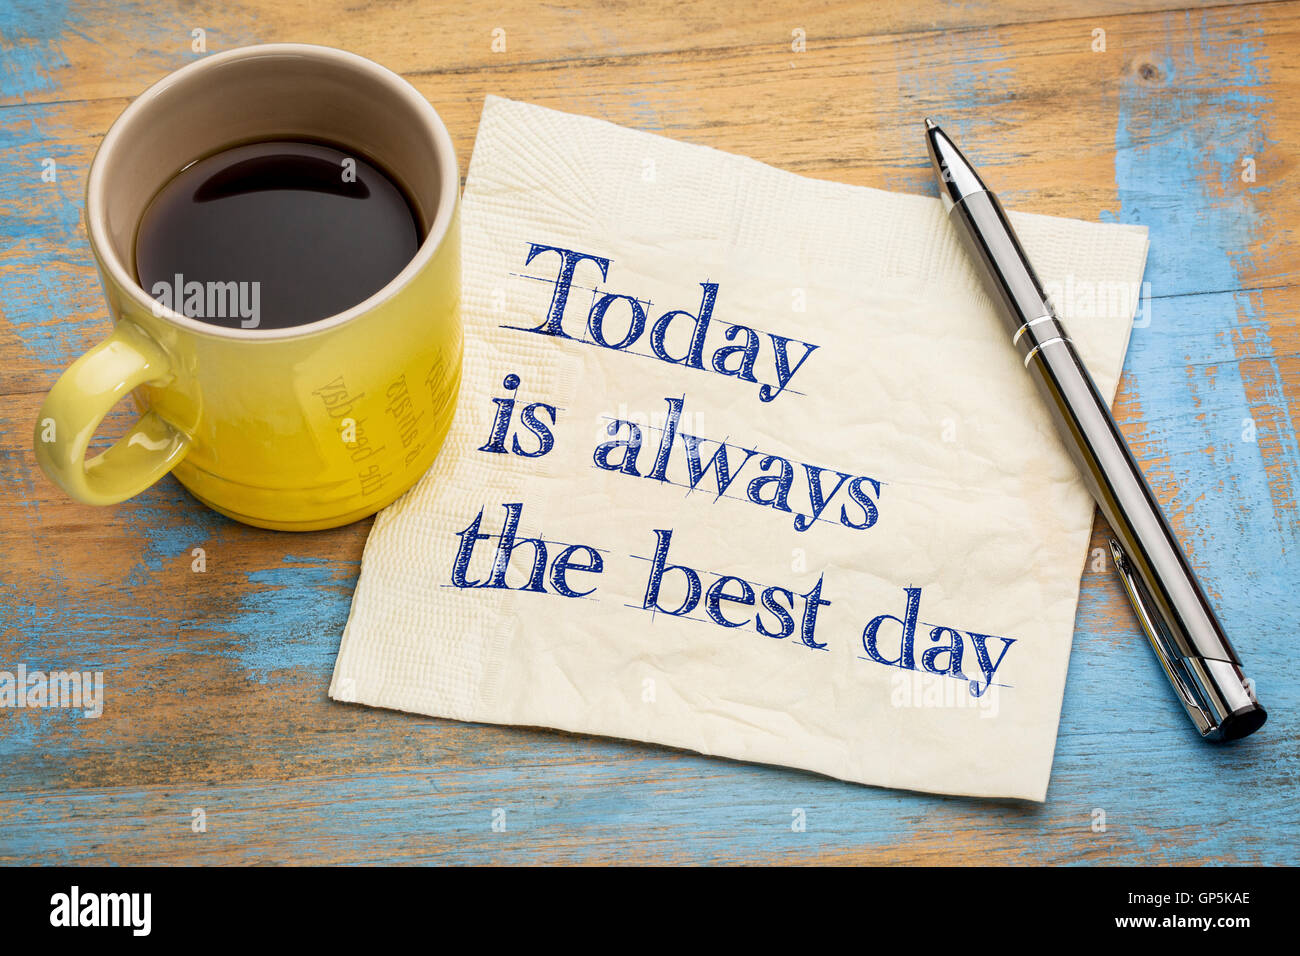 Today is always the best day - inspirational handwriting on a napkin with a cup of espresso coffee Stock Photo